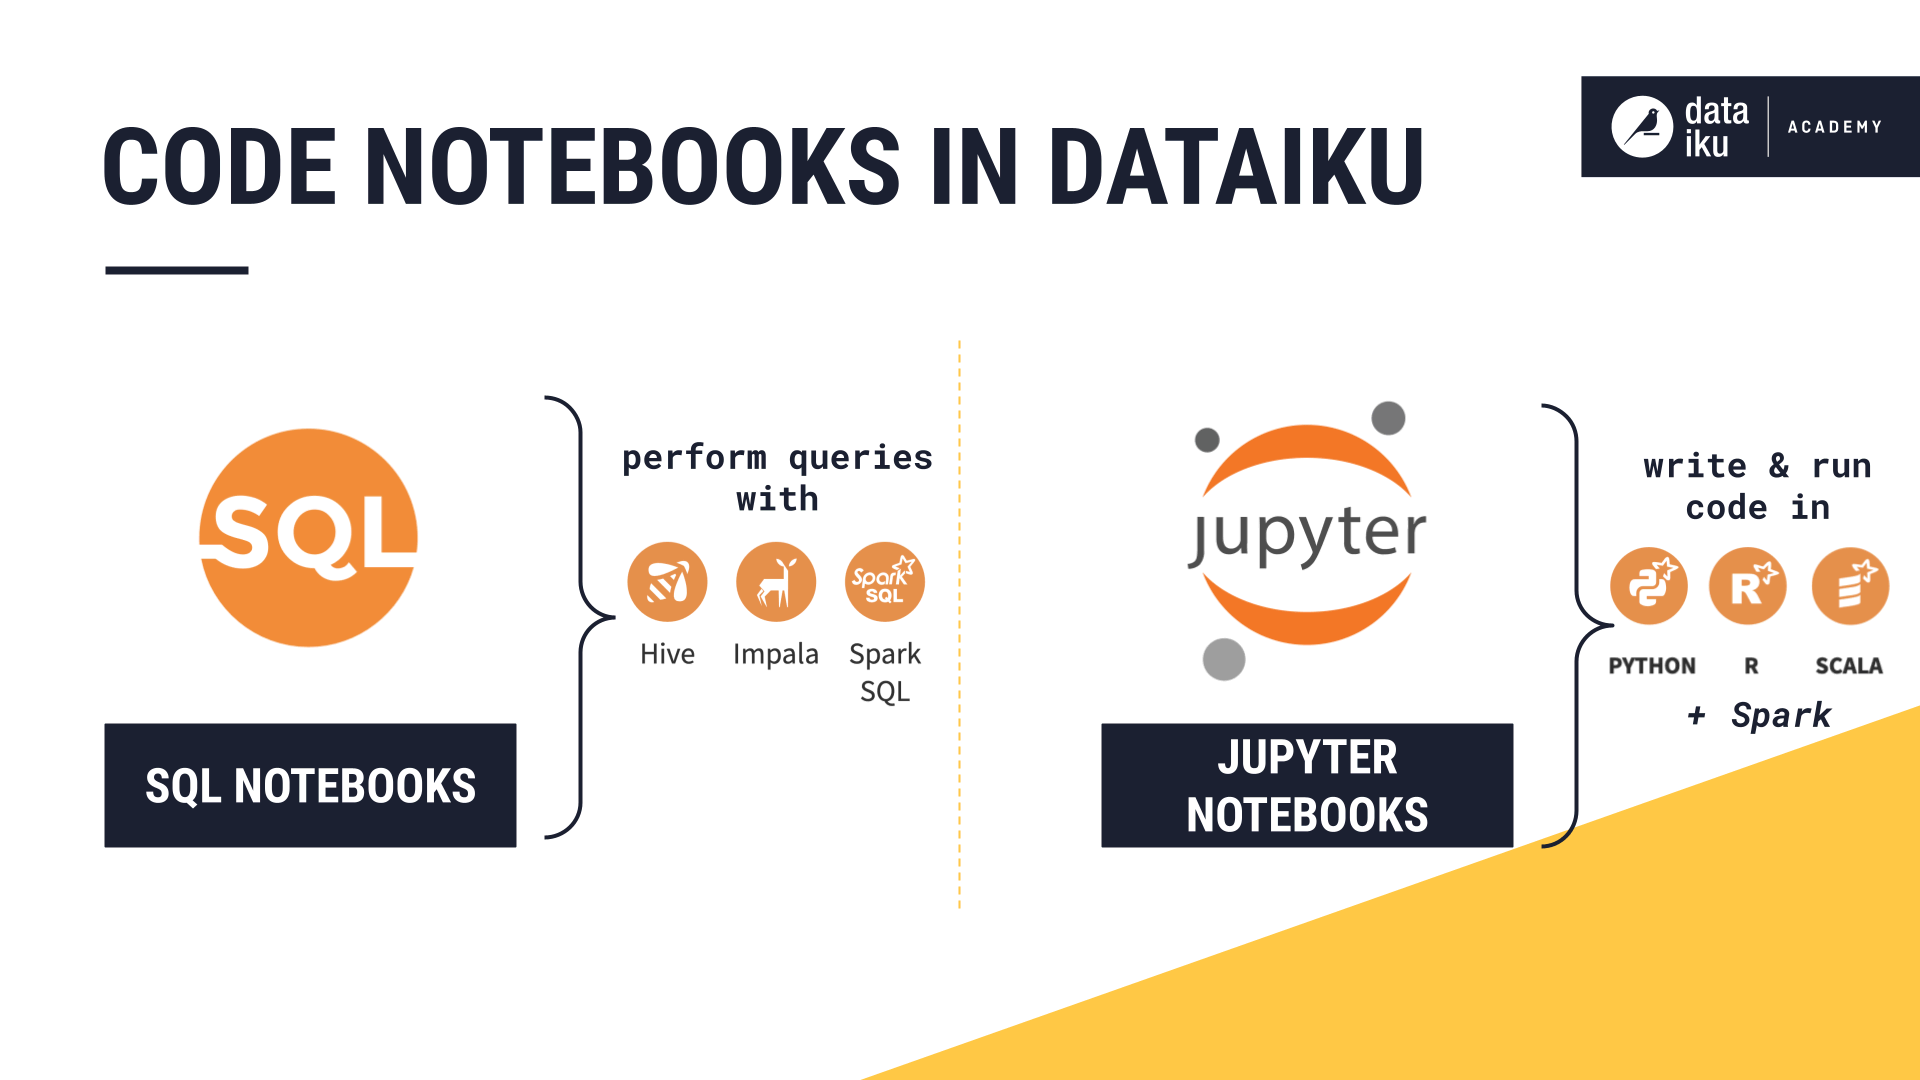 Slide depicting available code notebooks in Dataiku.